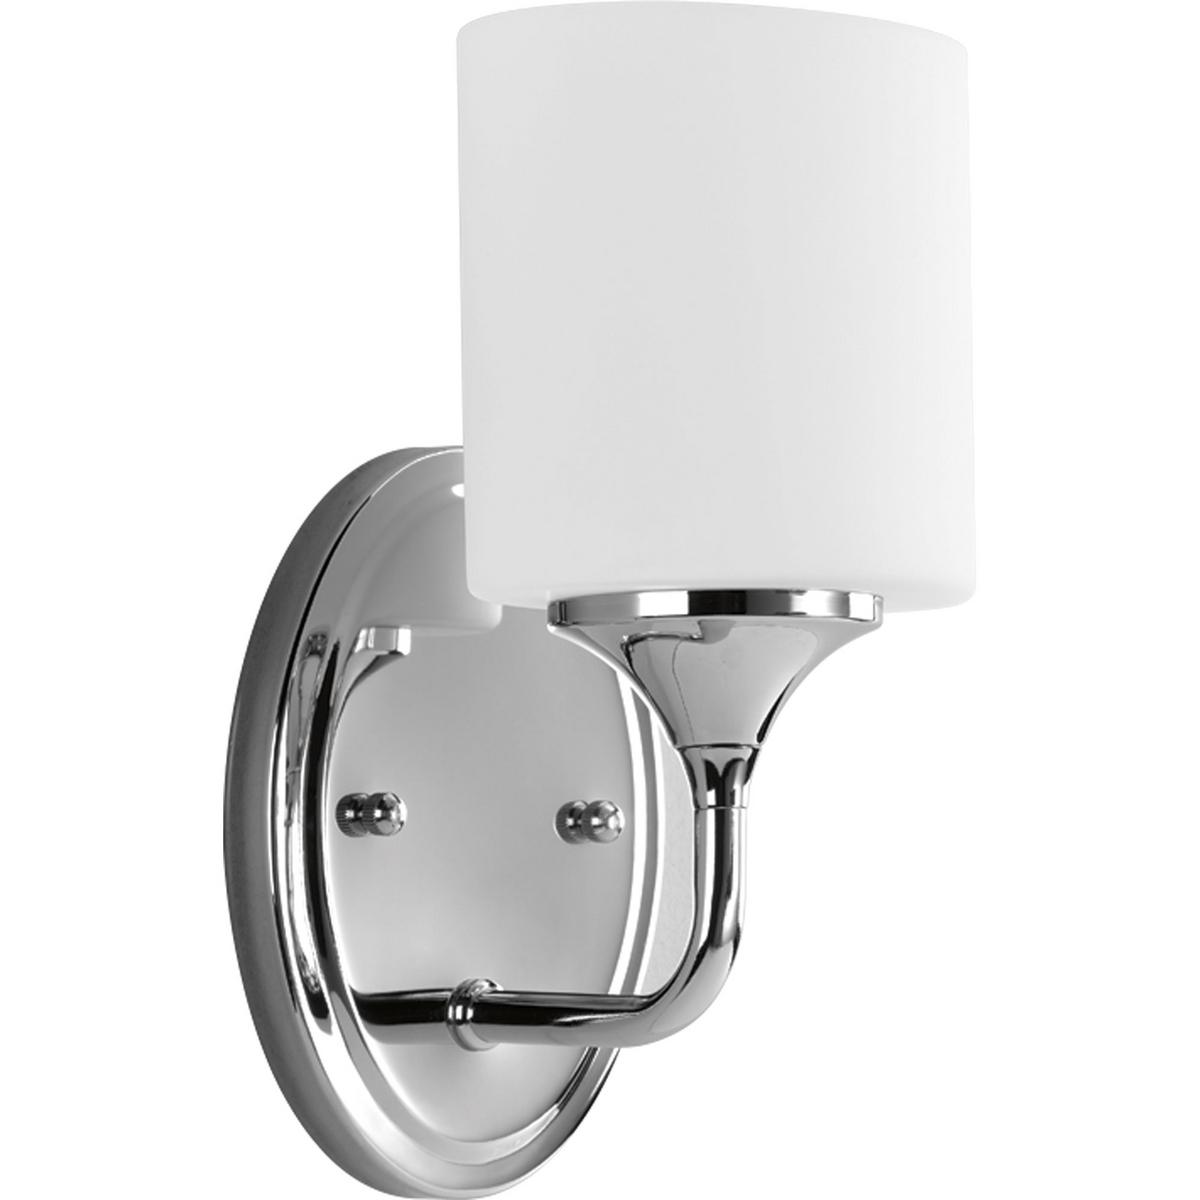 Hubbell P2801-15 With a youthful, yet timeless flair, the Lynzie Collection brightens your day with its simplicity. This one-light bath fixture with an etched, white, oval shaped glass shade held upright by a delicate classic Chrome finished arm portray the simple styling